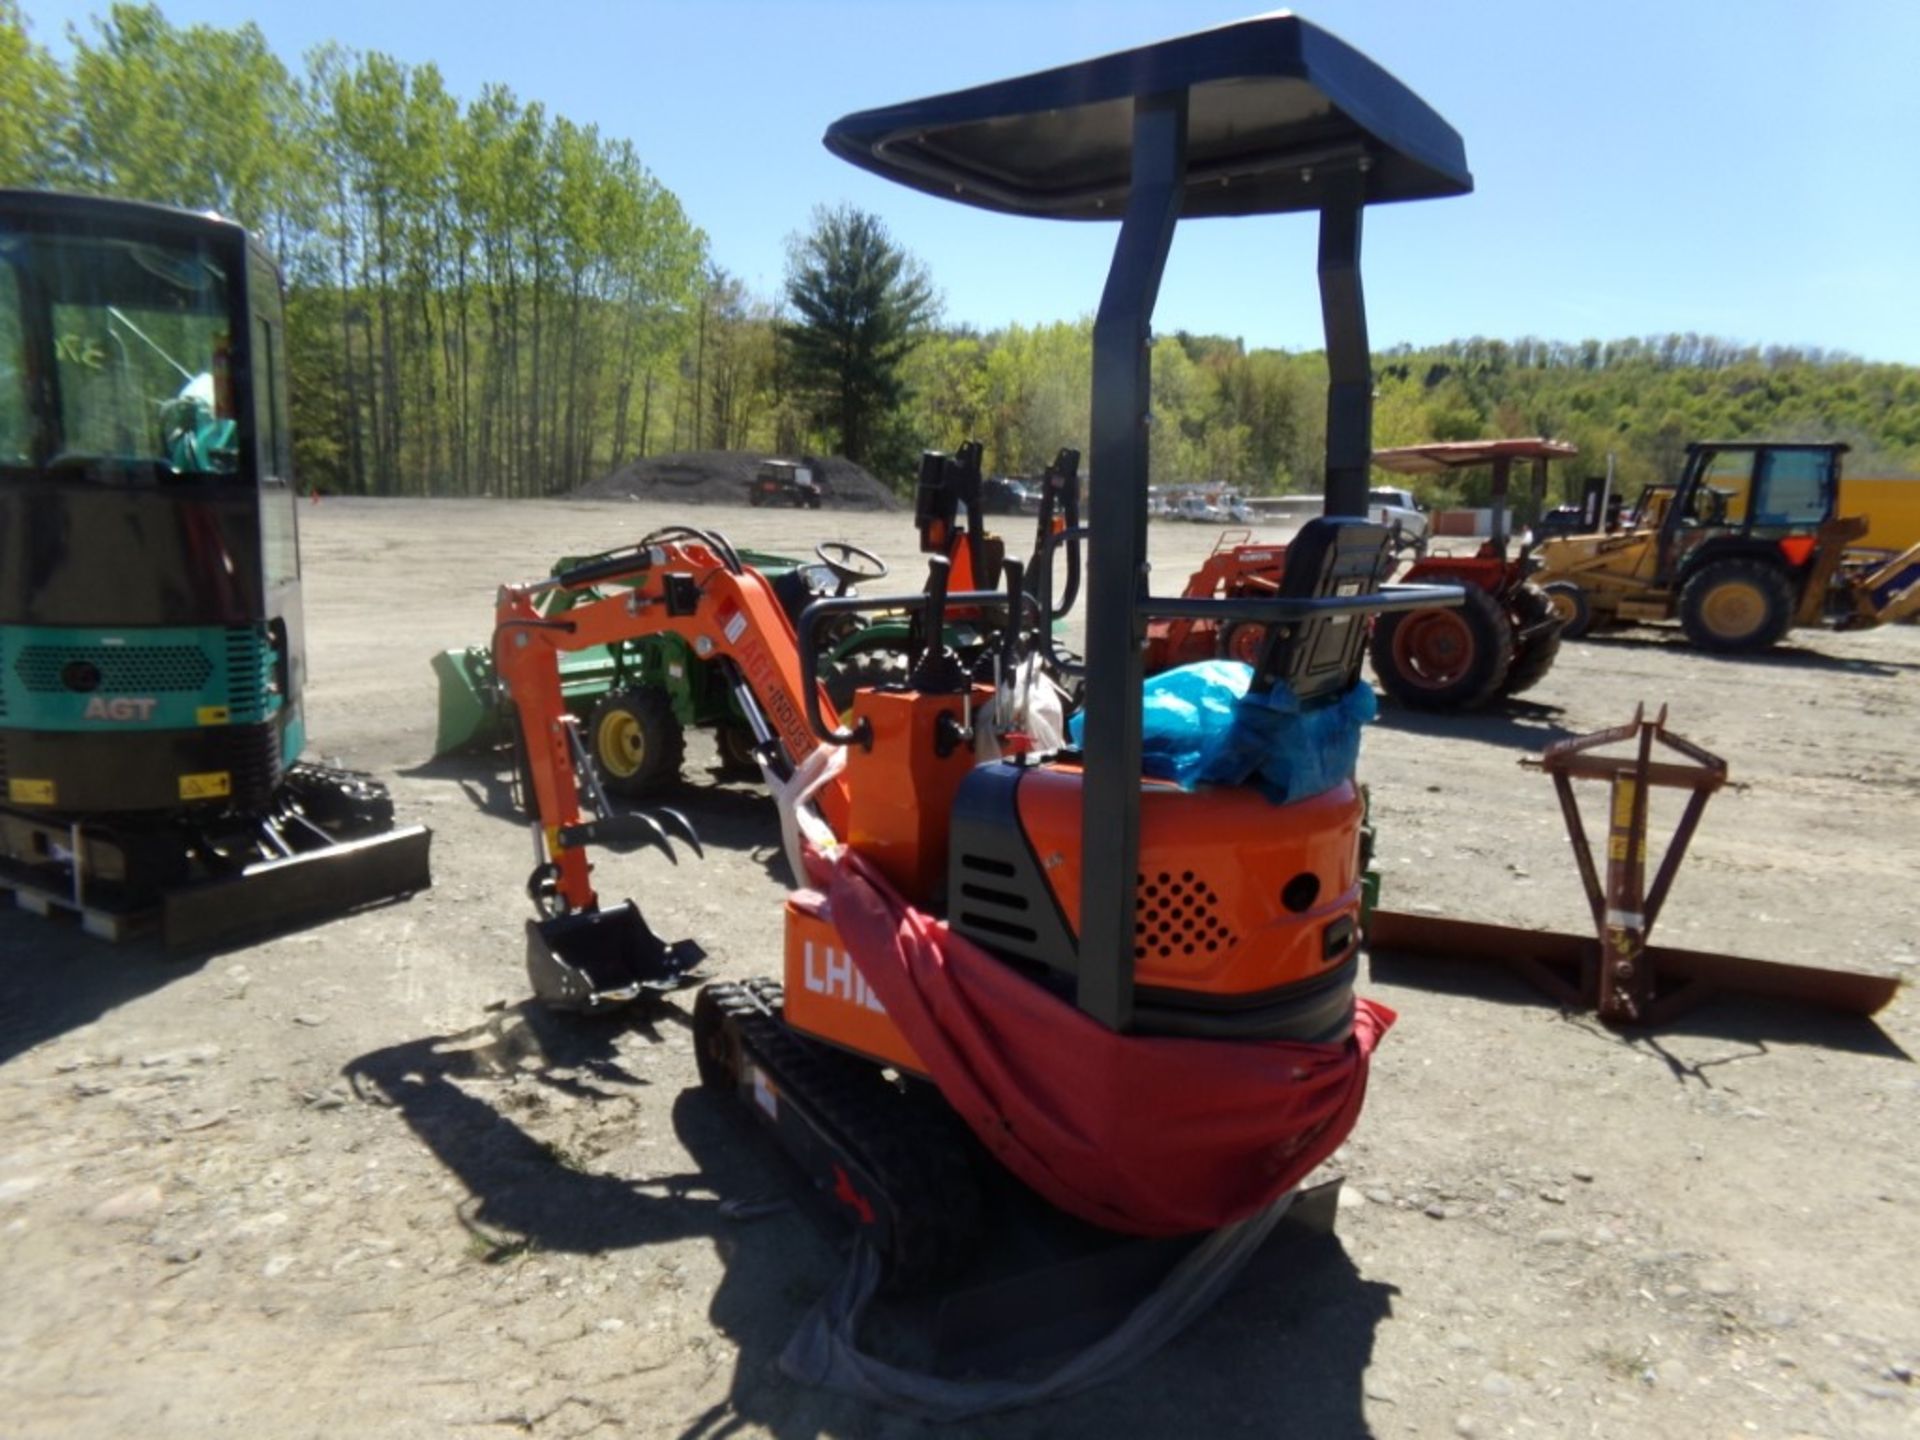 New AGT Industrial LH12R Mini Excavator with Open Cab, Stationary Thumb, Grader Blade, Gas Engine, - Image 2 of 5